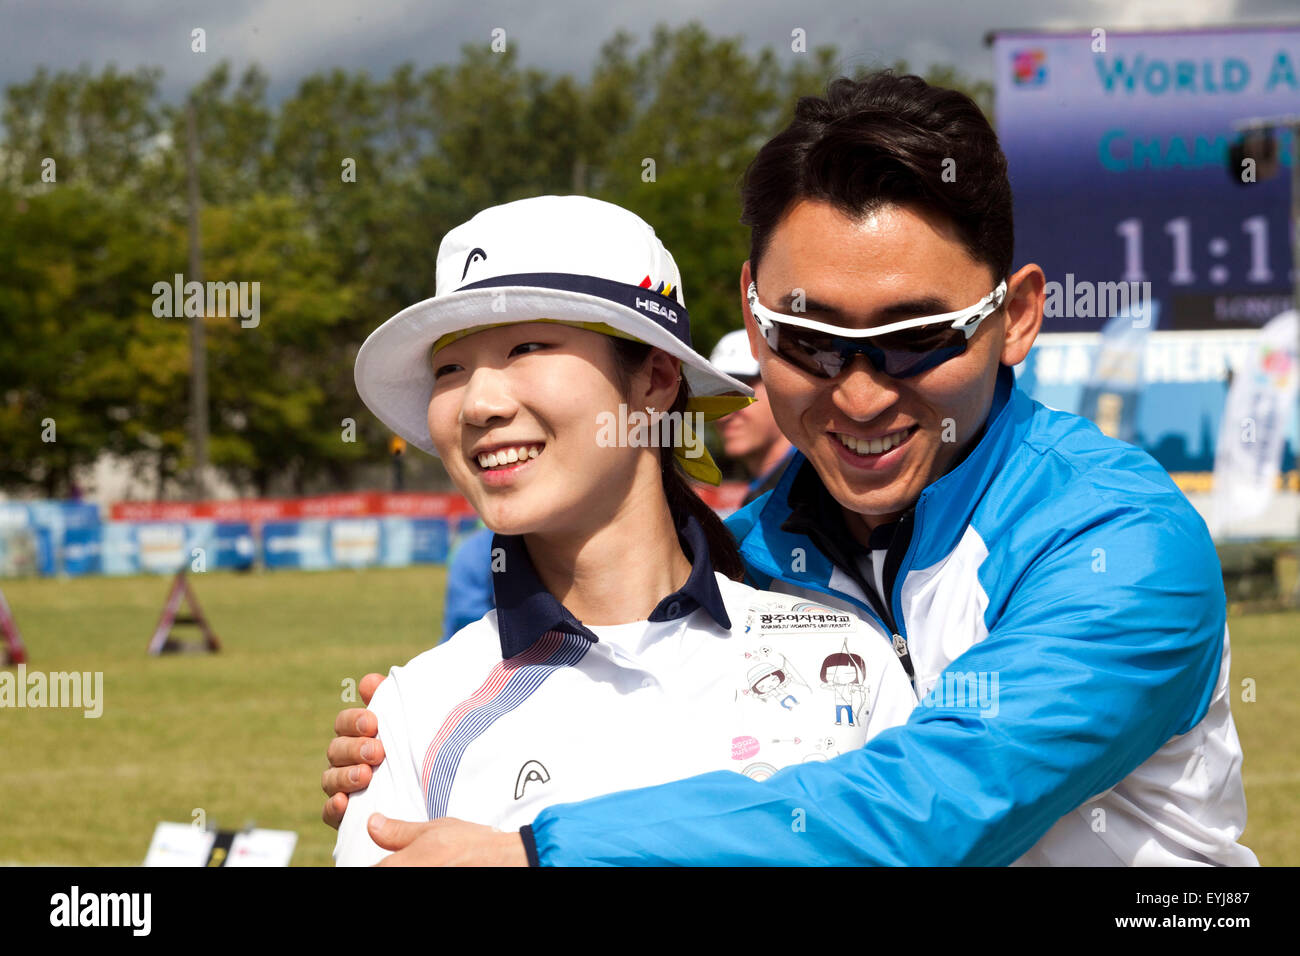 Copenhagen, Denmark, July 30th, 2015: Taipei archer Misun Choi is gratualted by her coach for a good result during Thursday recurve bow shooting at the World Archery Championships in Copenhagen. Credit:  OJPHOTOS/Alamy Live News Stock Photo